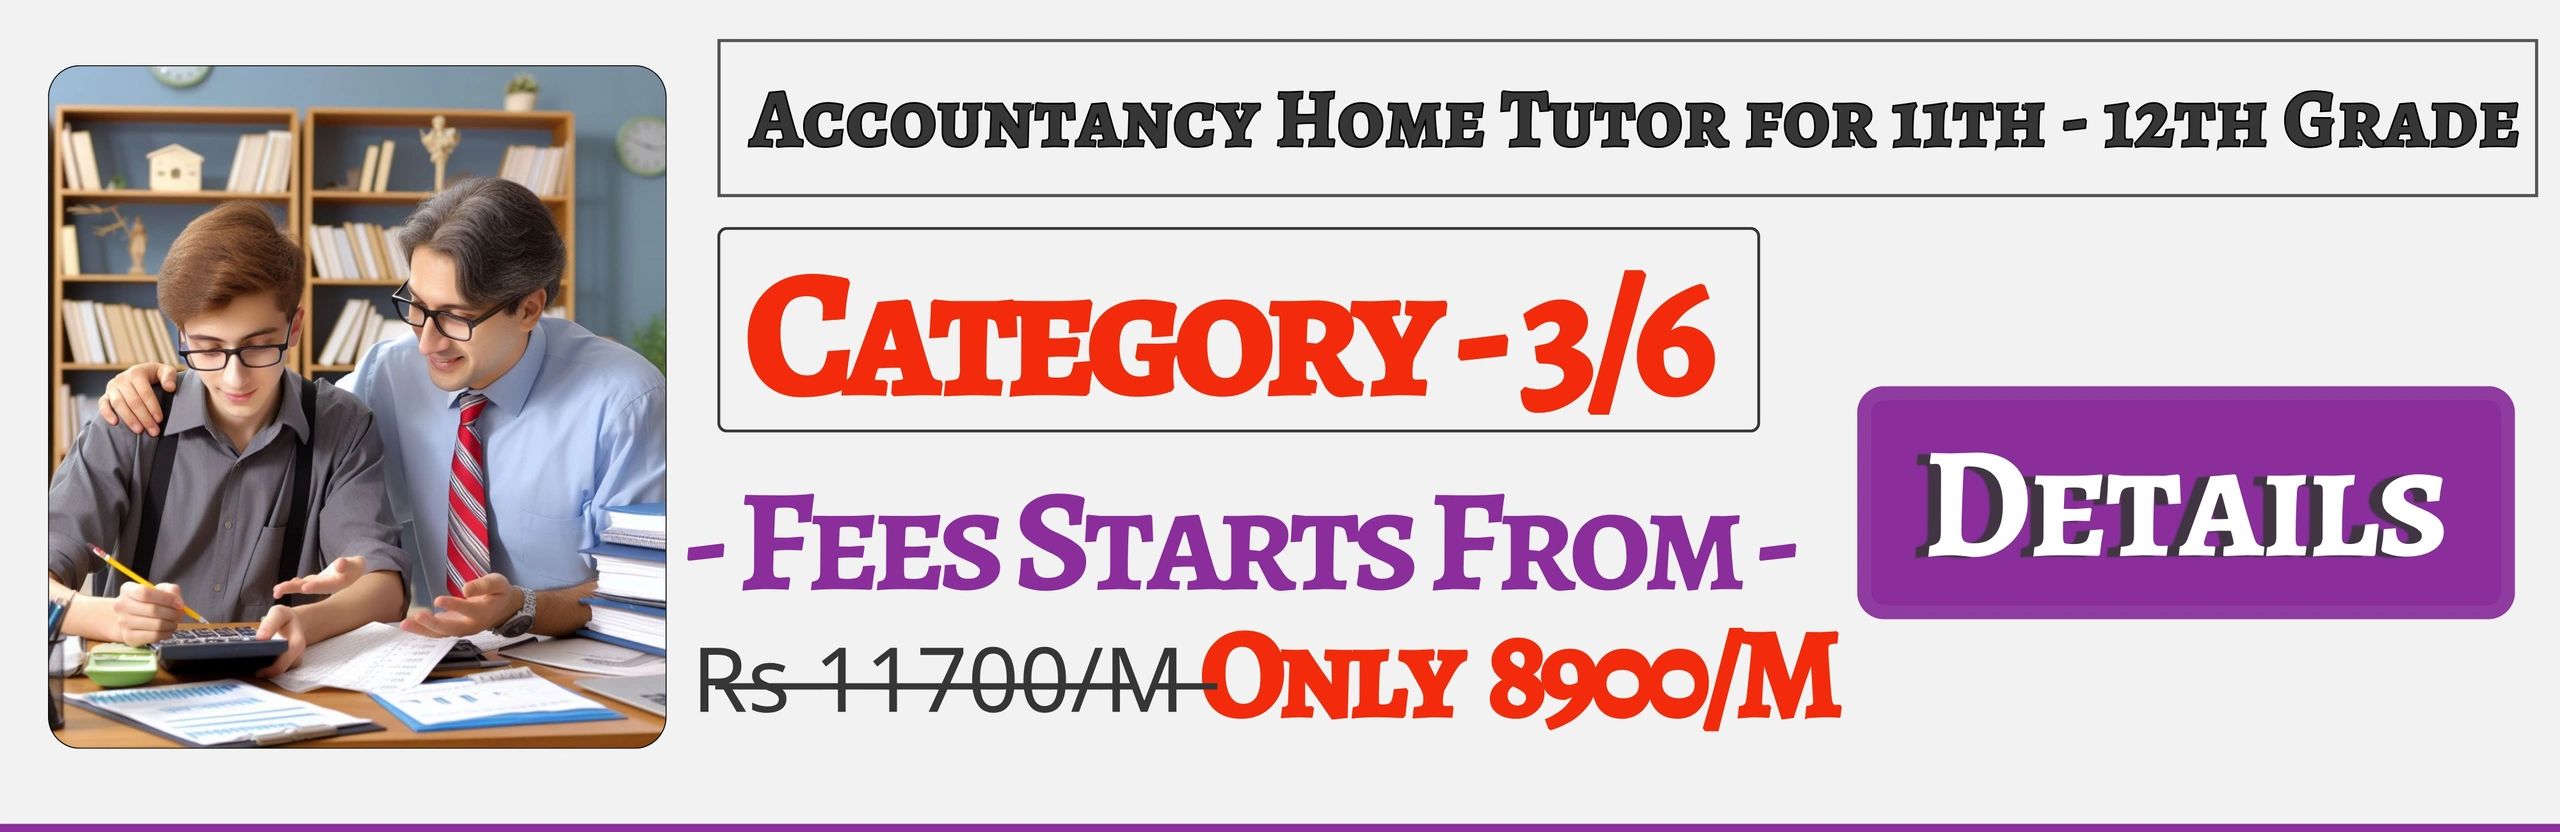 Book Best Nearby Accountancy Home Tuition Tutors For 11th & 12th Jaipur ,Fees Only 8900/M